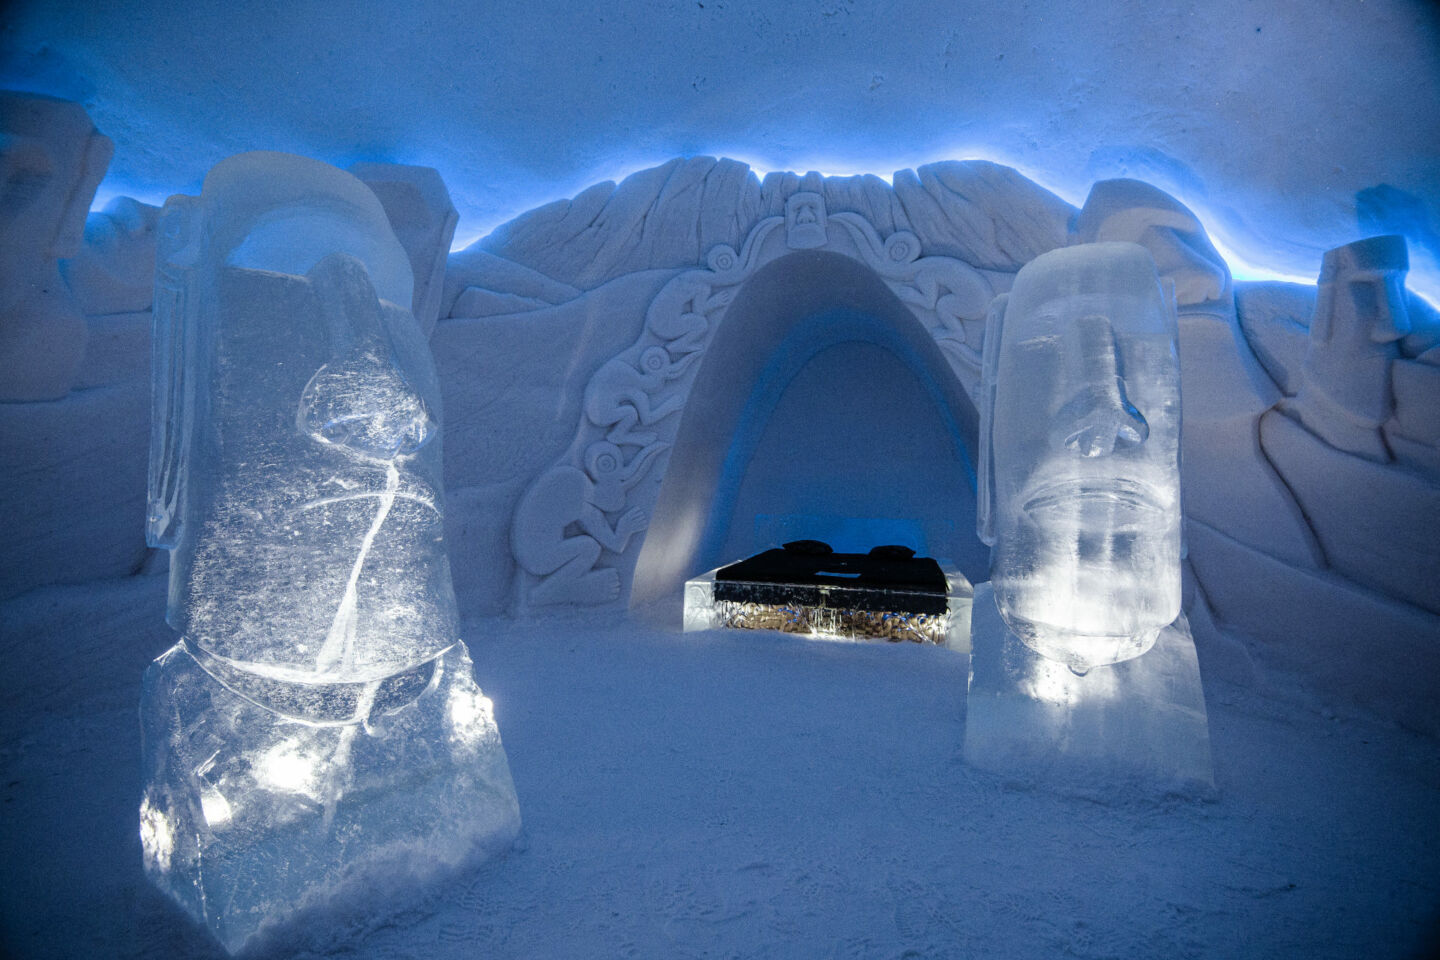 Ice sculptures at the entrance of the Lapland Hotels Snowvillage, a Finnish Lapland filming location